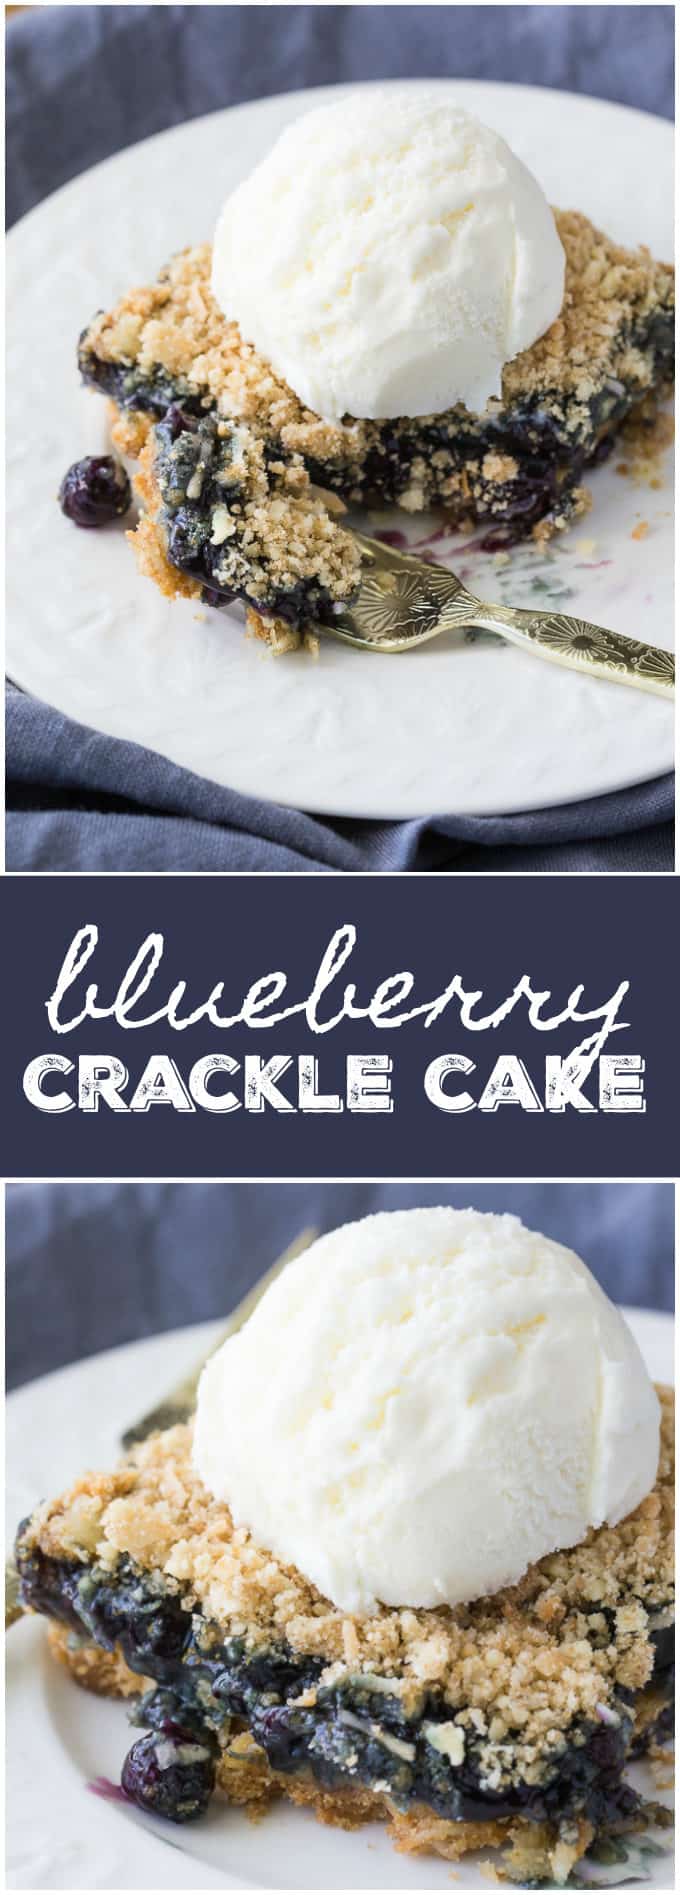 Blueberry Crackle Cake - Cake and crumble combine for this delicious and fruity old-fashioned dessert. Top with some vanilla ice cream!